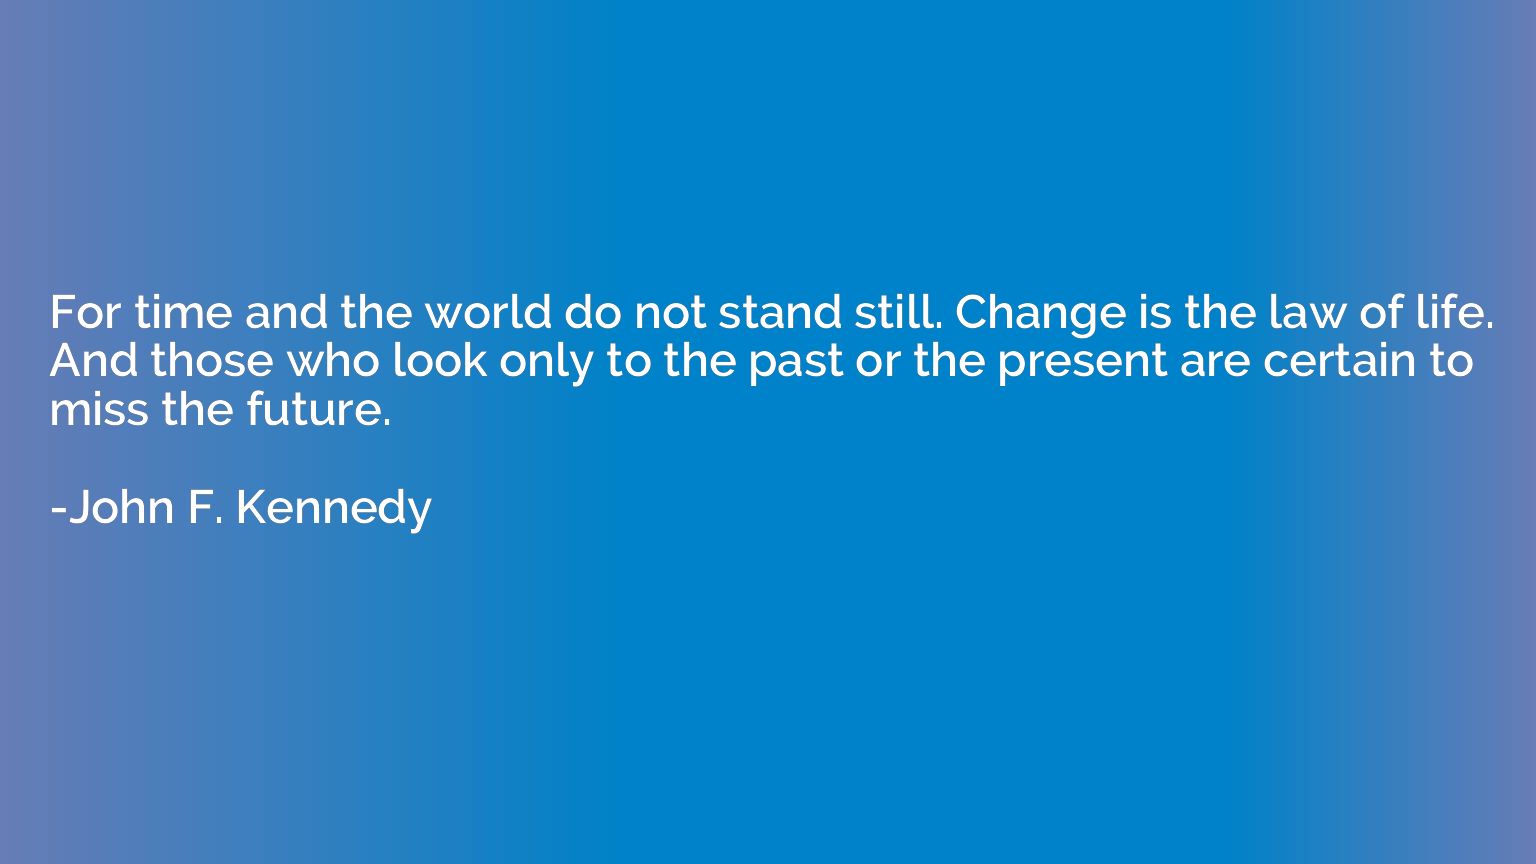 For time and the world do not stand still. Change is the law